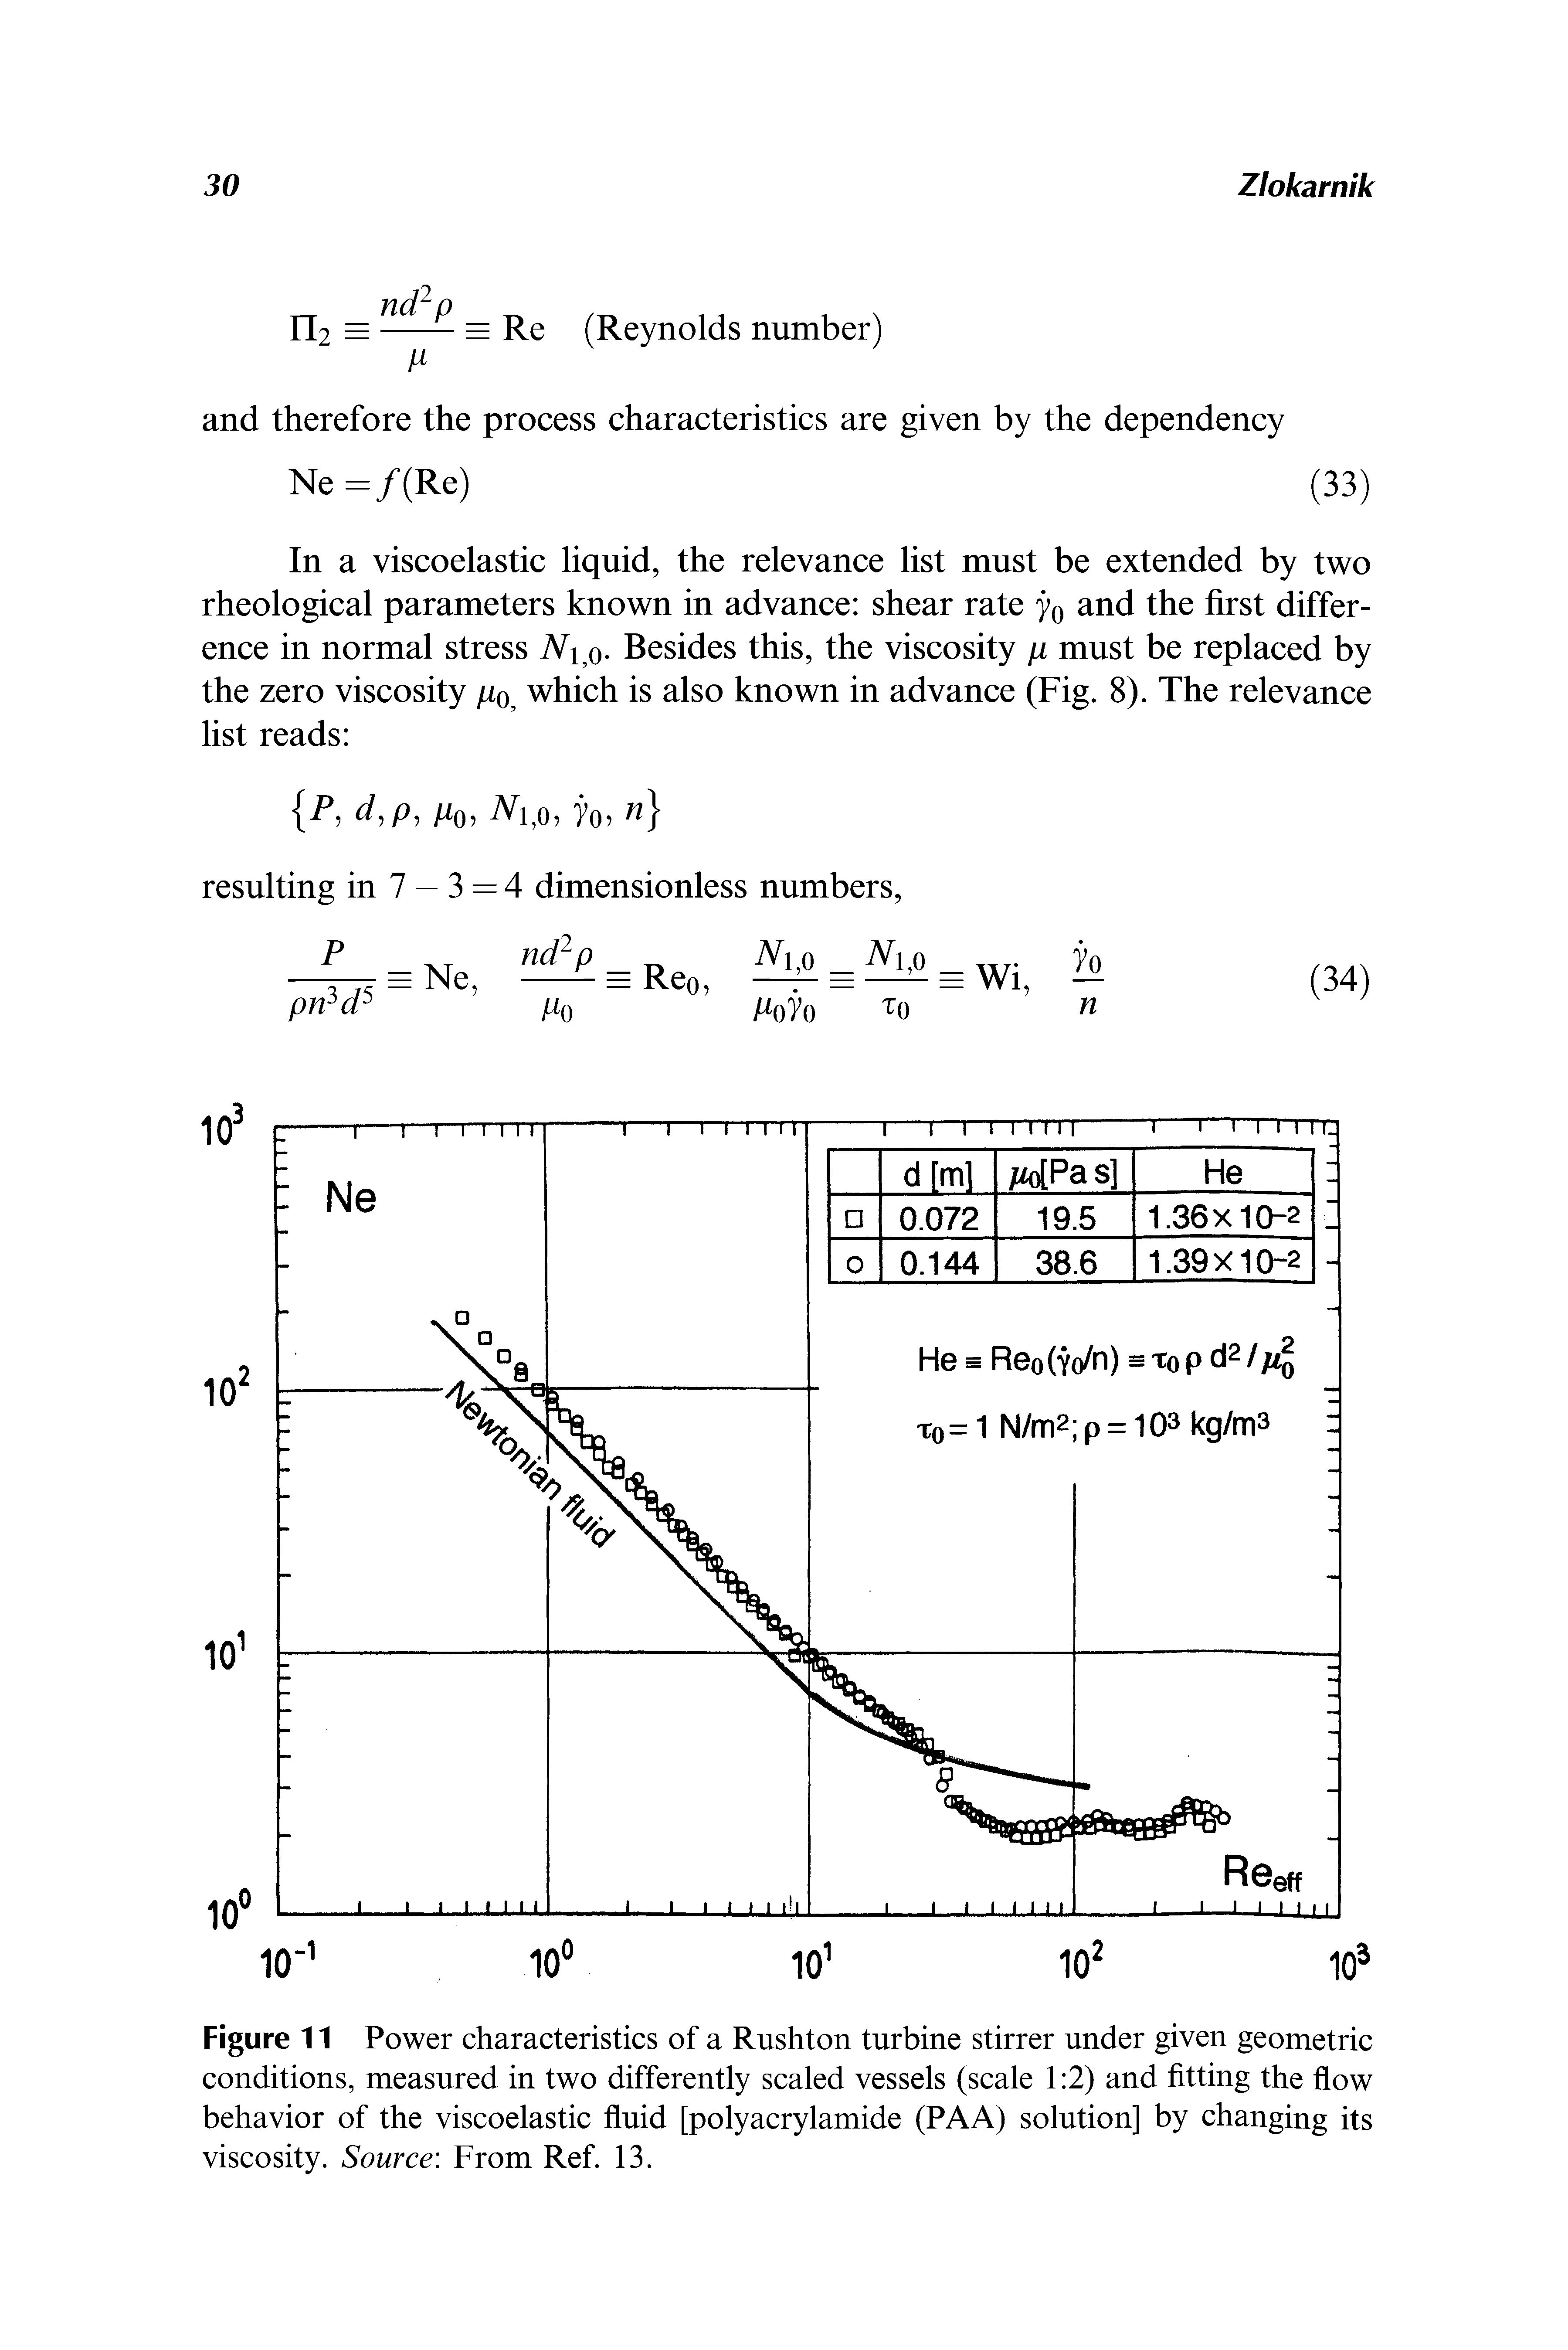 Figure 11 Power characteristics of a Rushton turbine stirrer under given geometric conditions, measured in two differently scaled vessels (scale 1 2) and fitting the flow behavior of the viscoelastic fluid [polyacrylamide (PAA) solution] by changing its viscosity. Source From Ref 13.